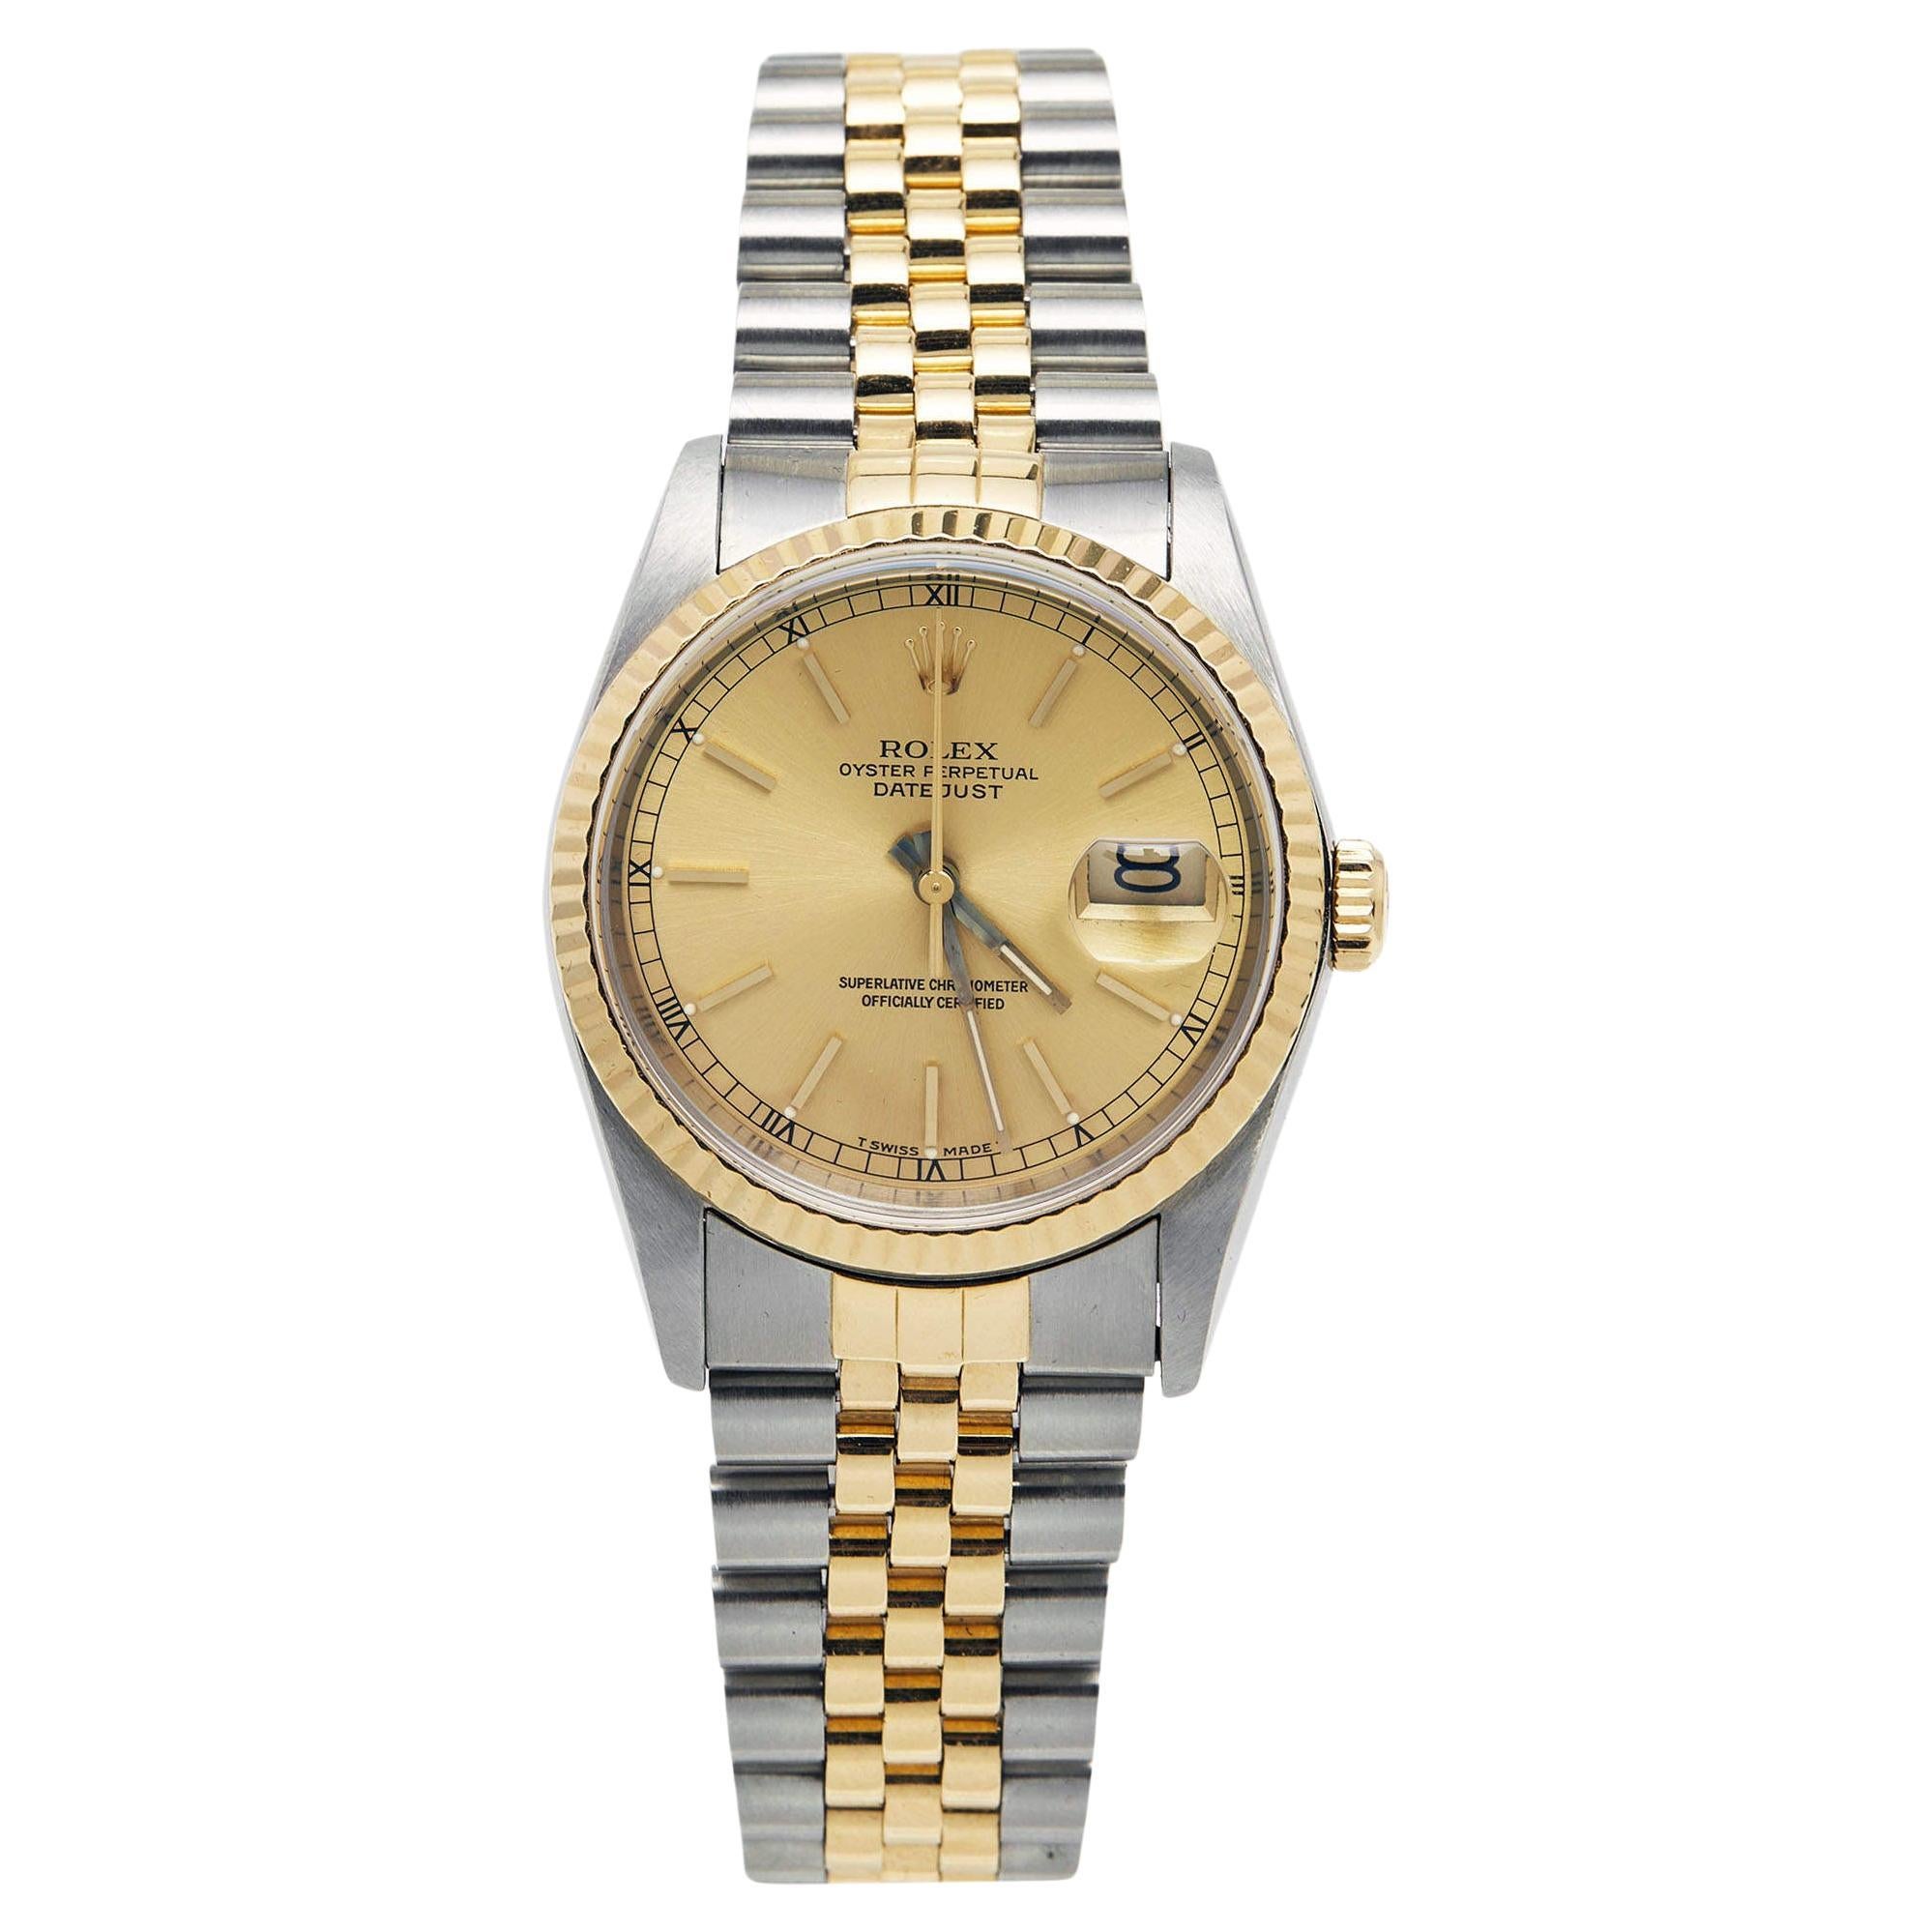 Rolex Champagne 18k Yellow Gold And Stainless Datejust Men's Wristwatch 36 mm For Sale